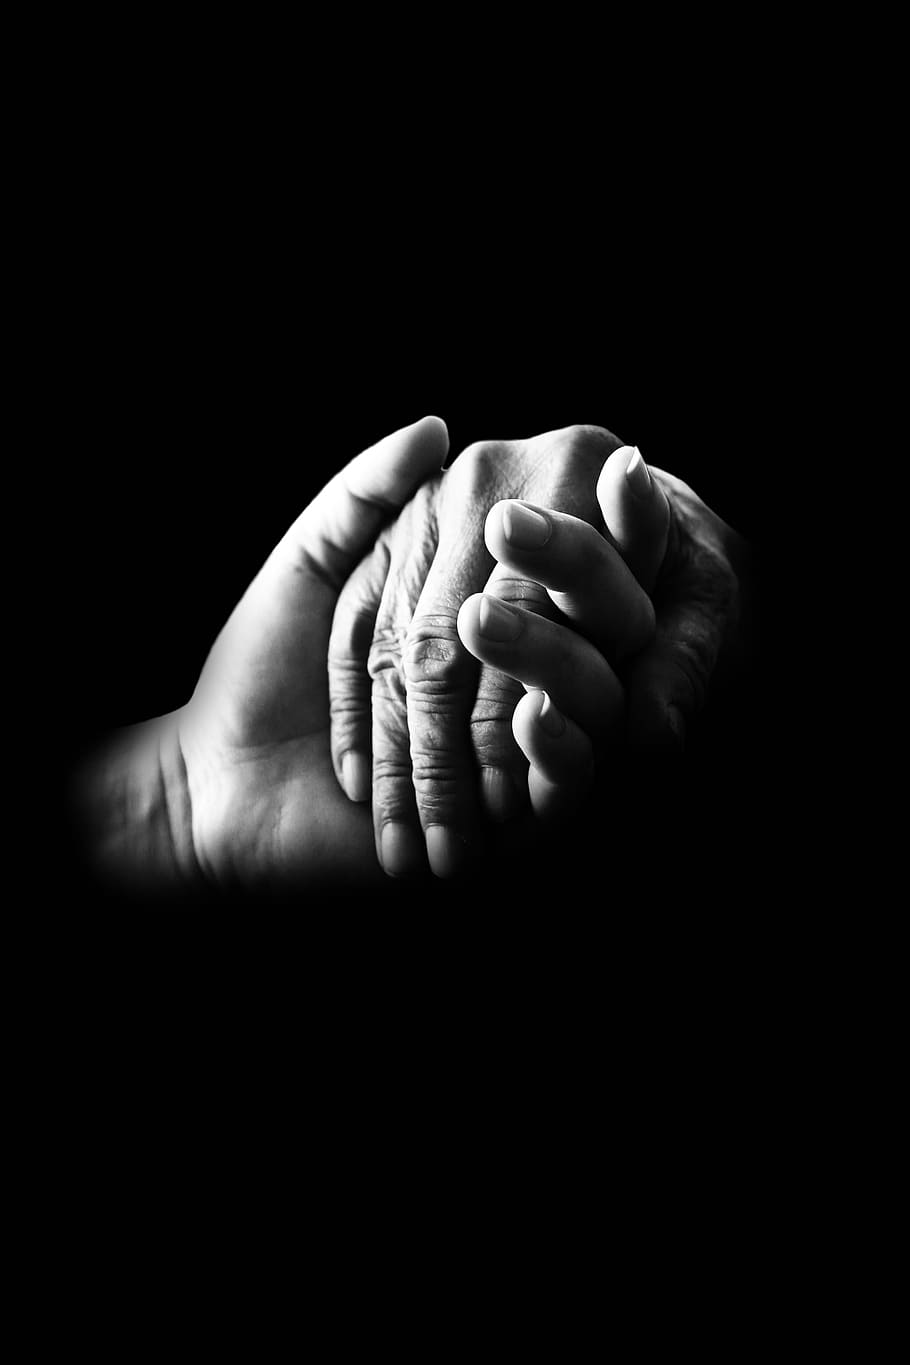 HD wallpaper: grayscale photo of two hands holding each other